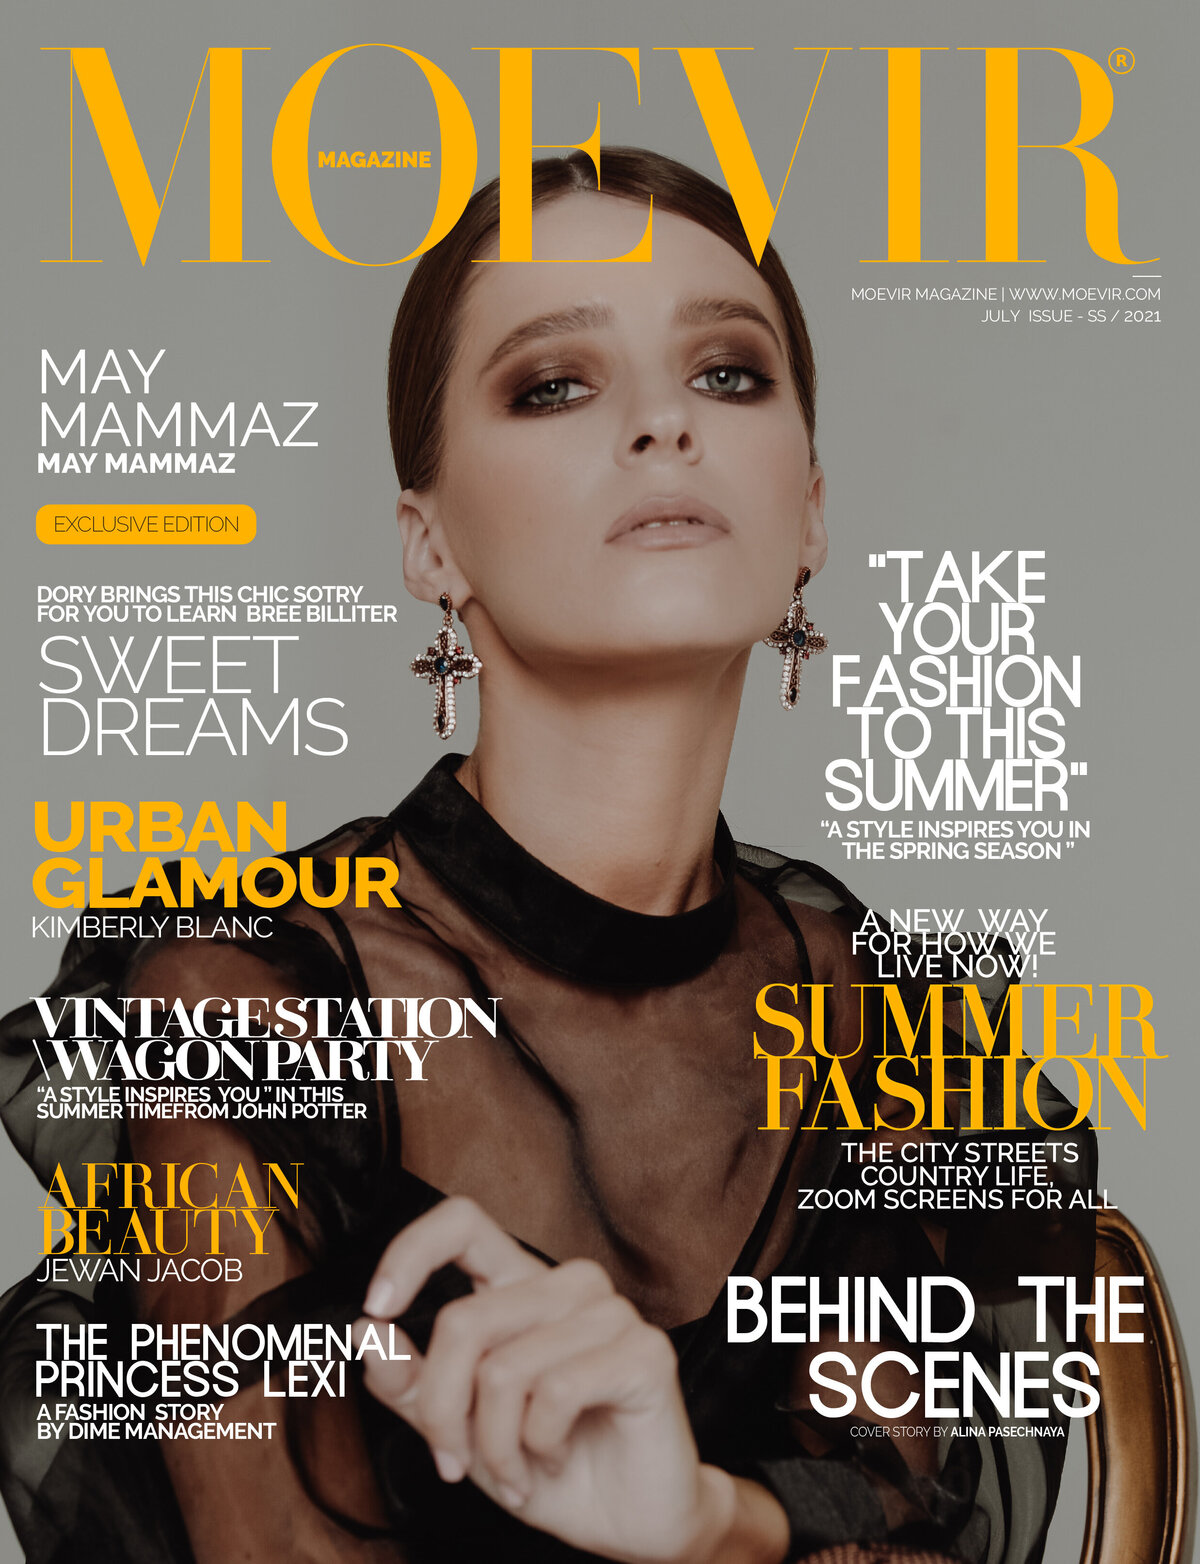 A Moevir Magazine July Issue 2021